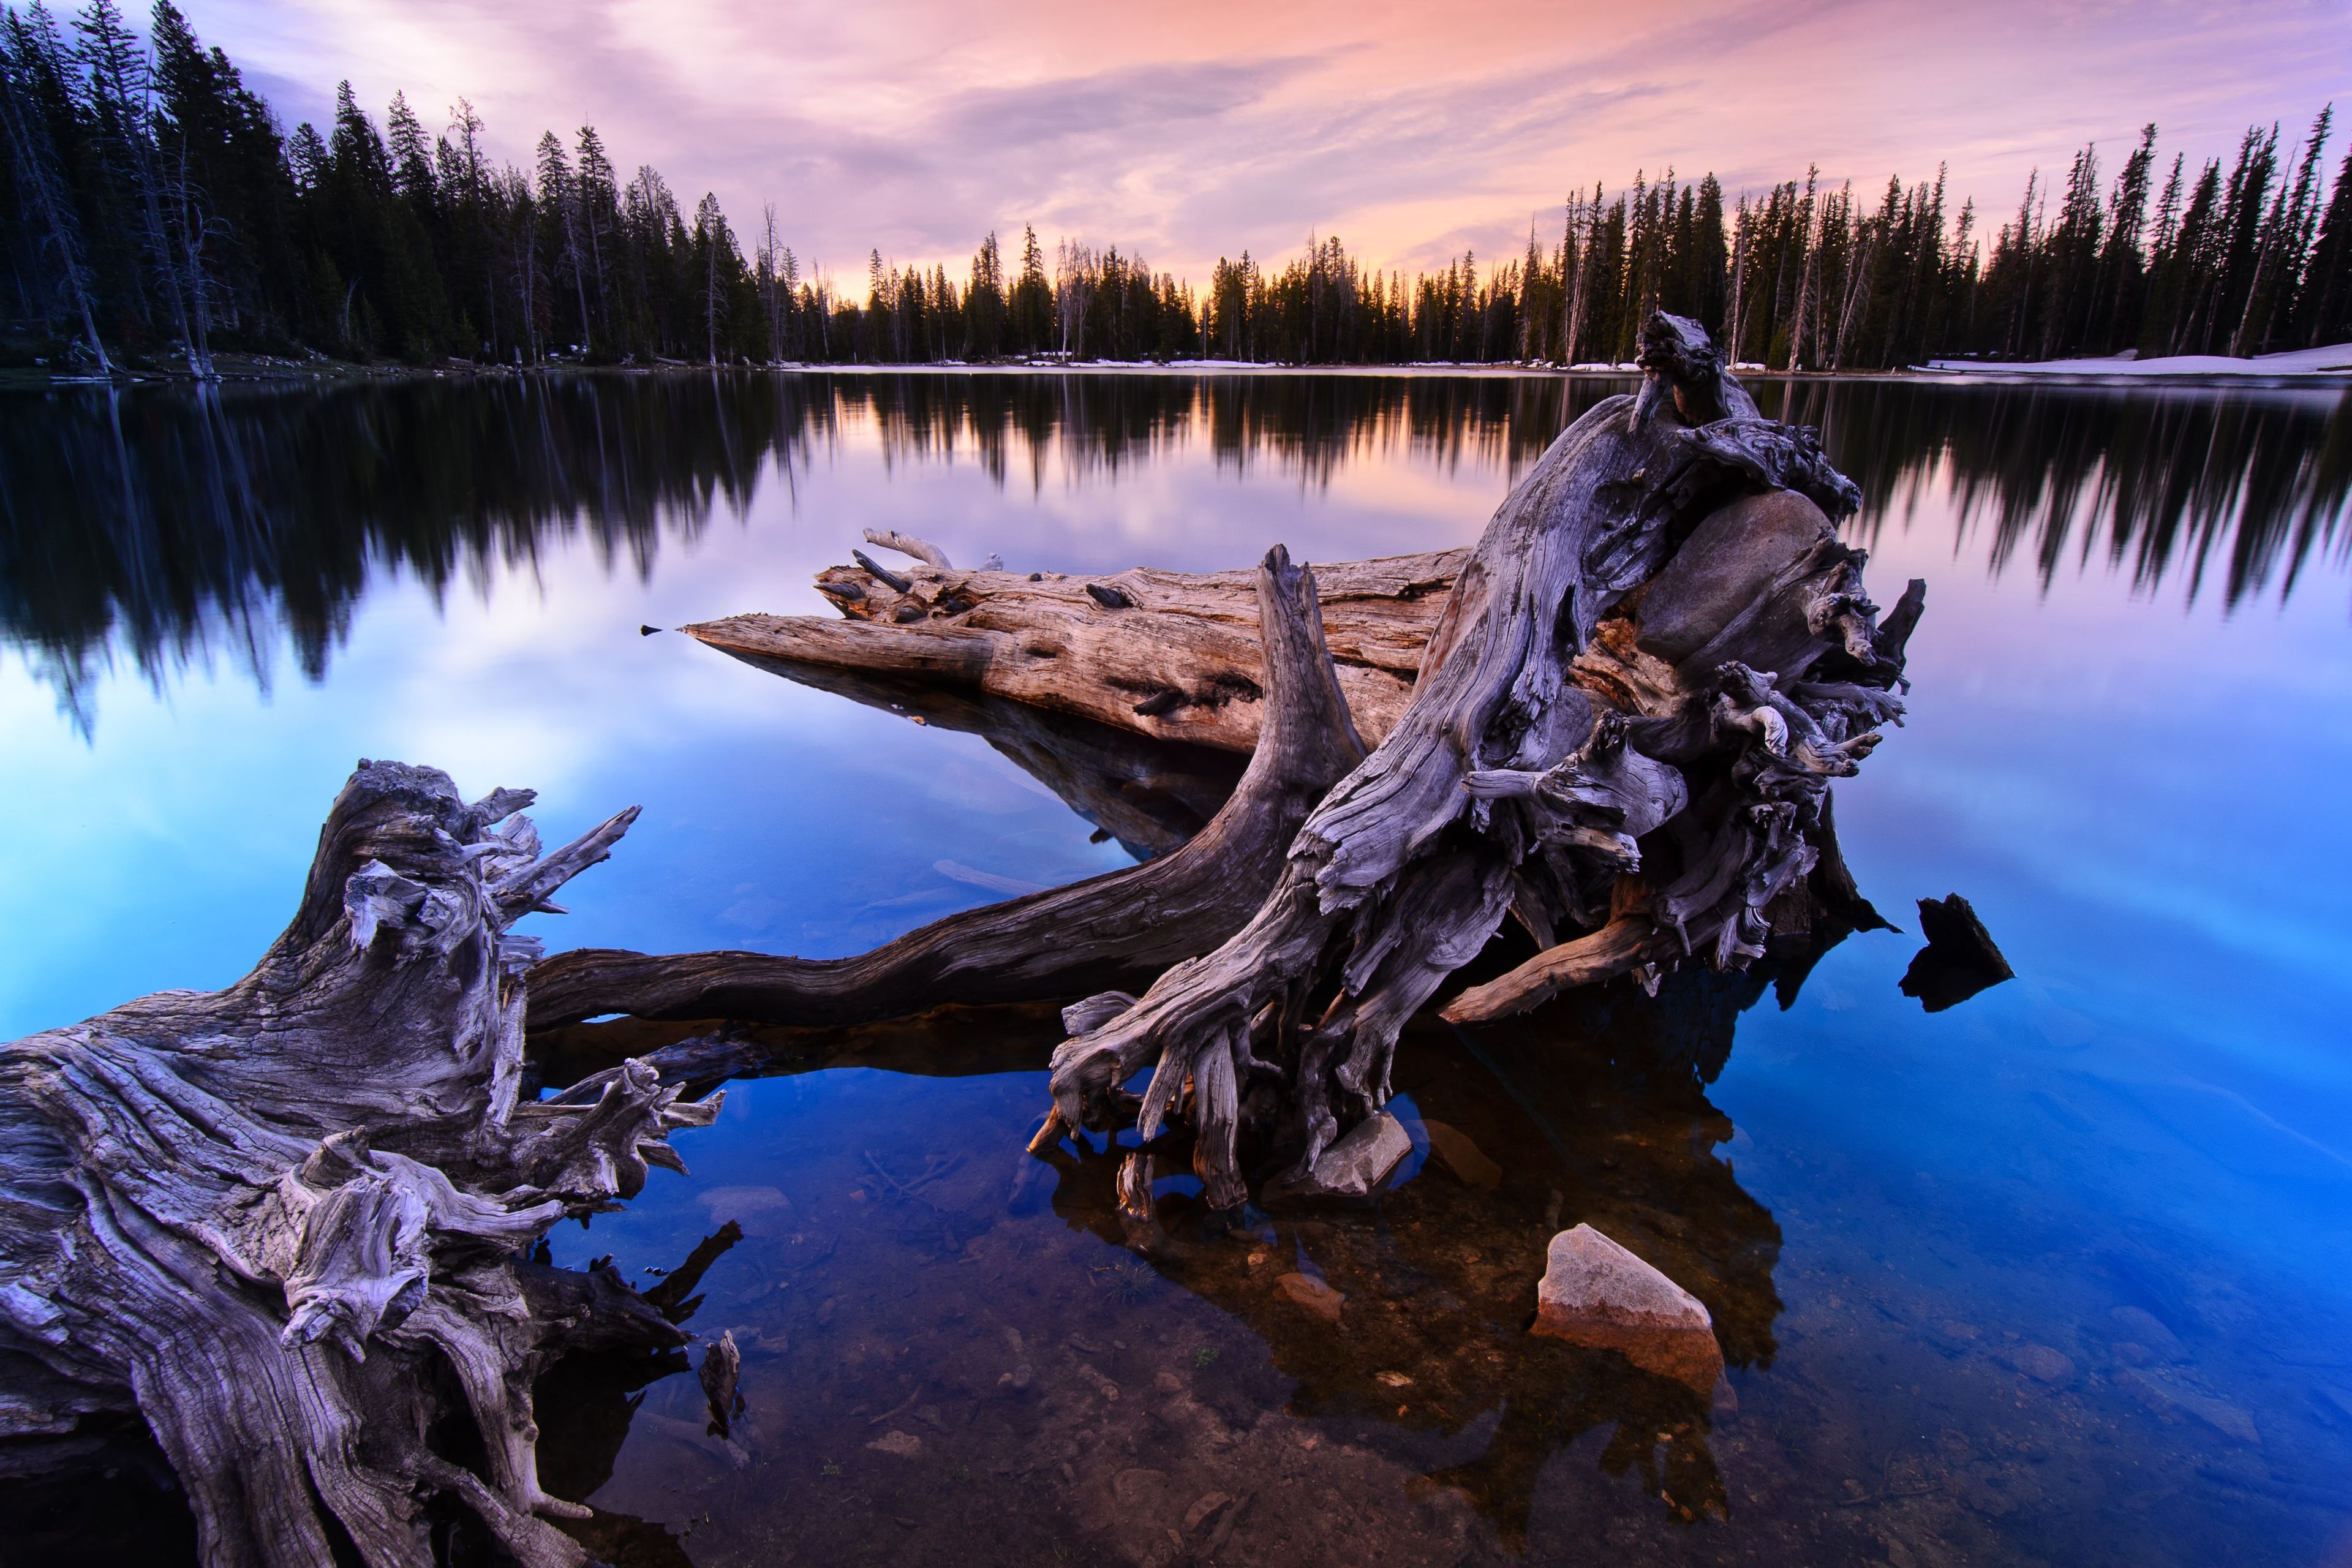 An image of large driftwood sitting in Crystal Lake.